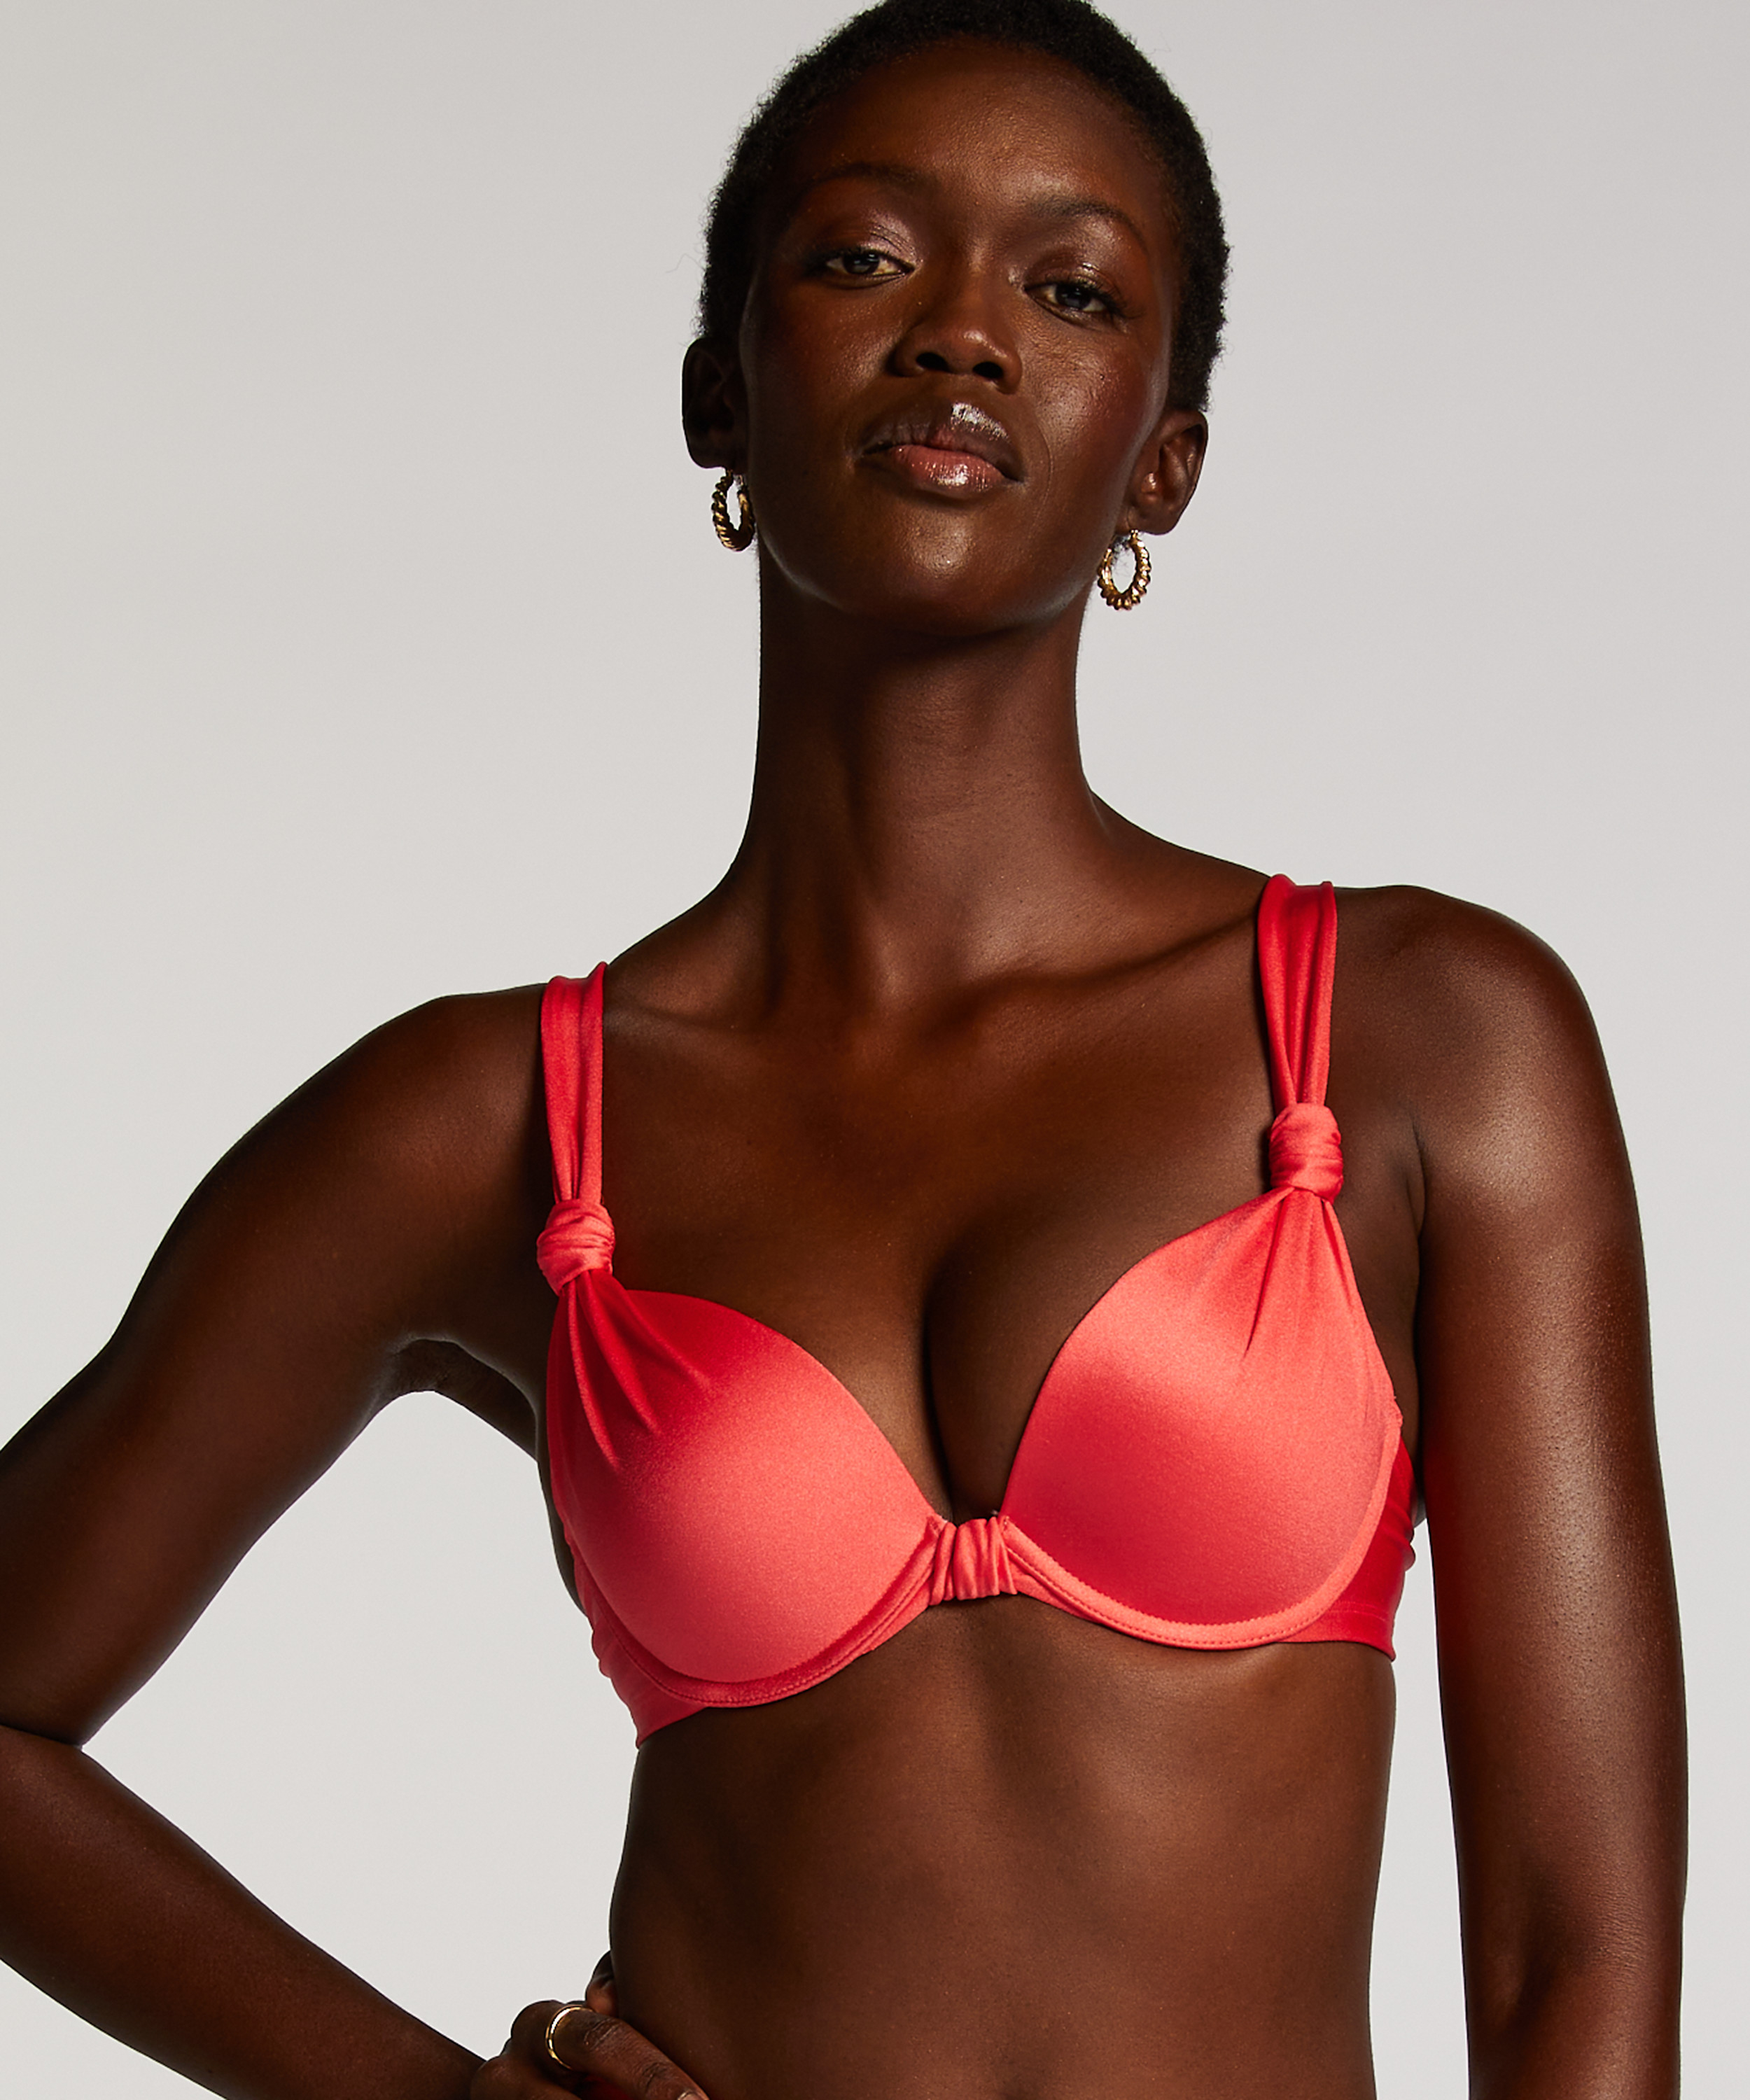 Padded underwired bikini top Luxe Cup E +, Red, main